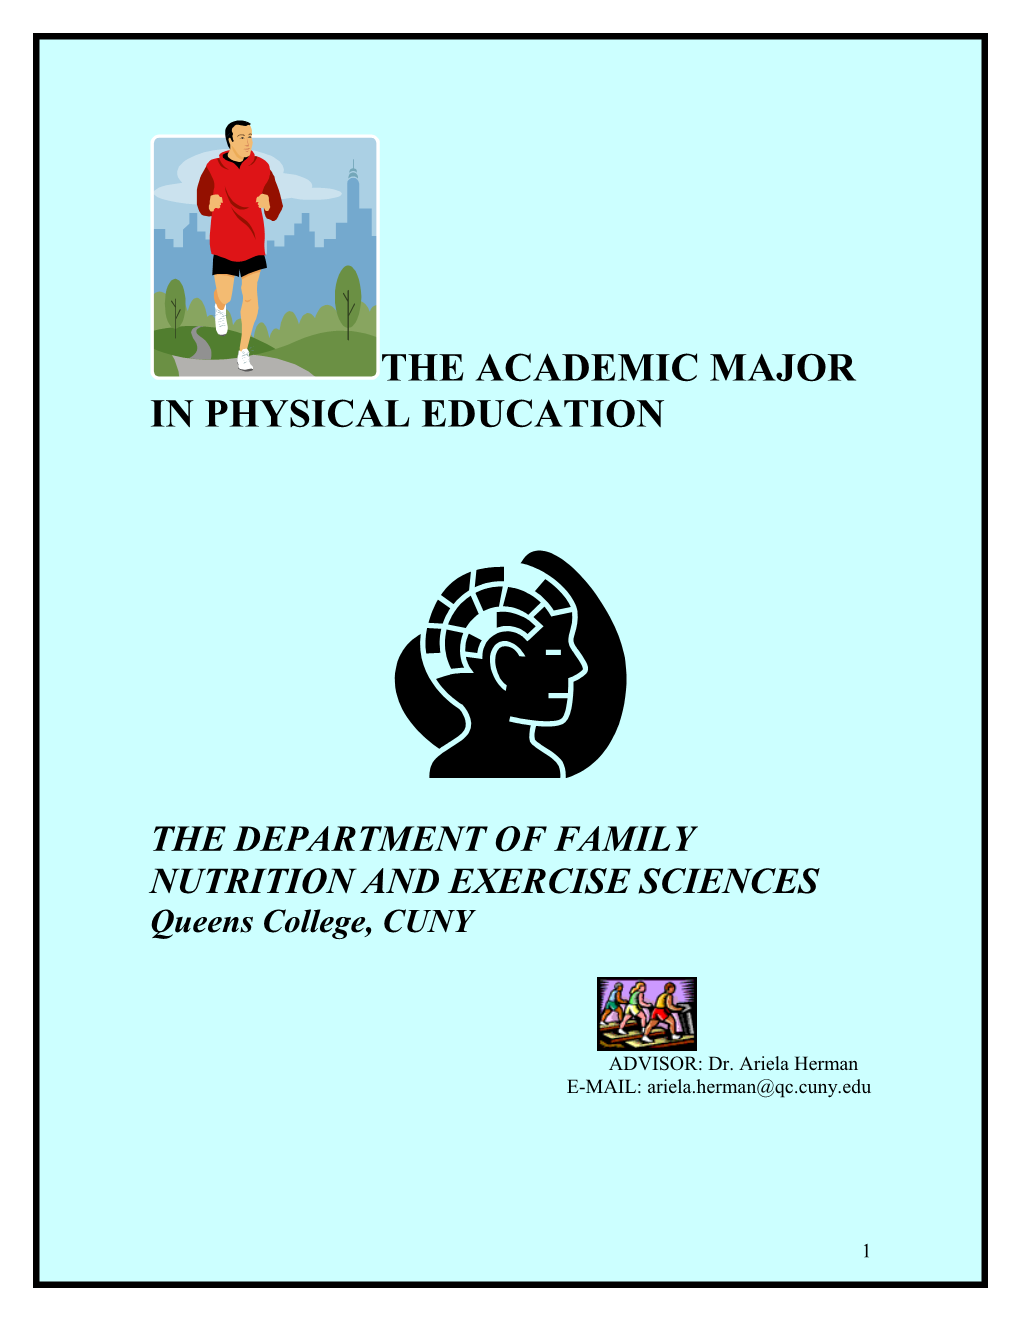 The Academic Major in Physical Education